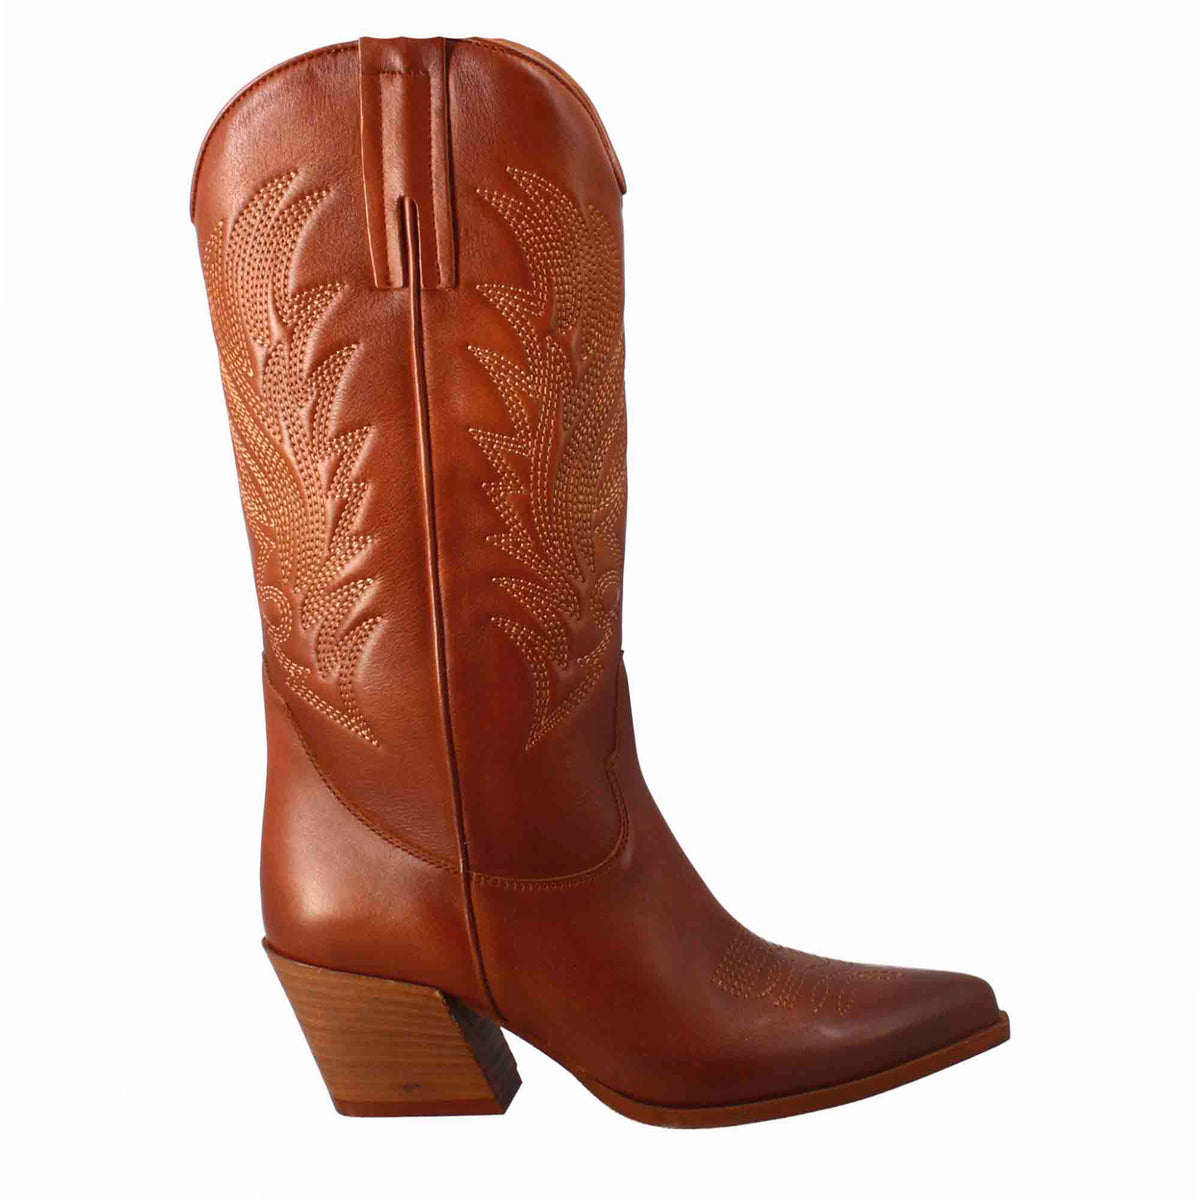 Women's medium Texan boots in brown leather with embroidery.